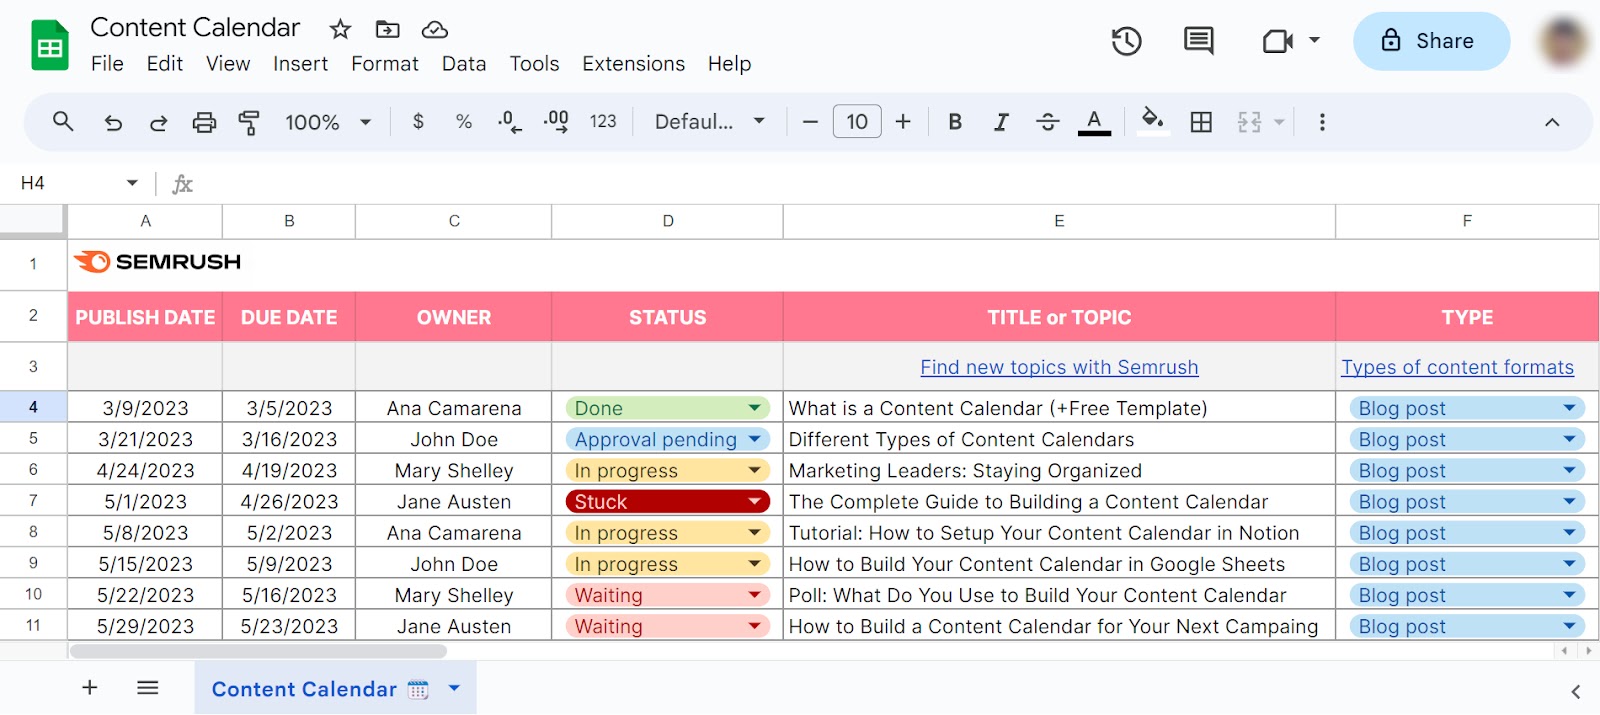 Content calendar template showing publish date, due date, owner, status, title/topic, and type.